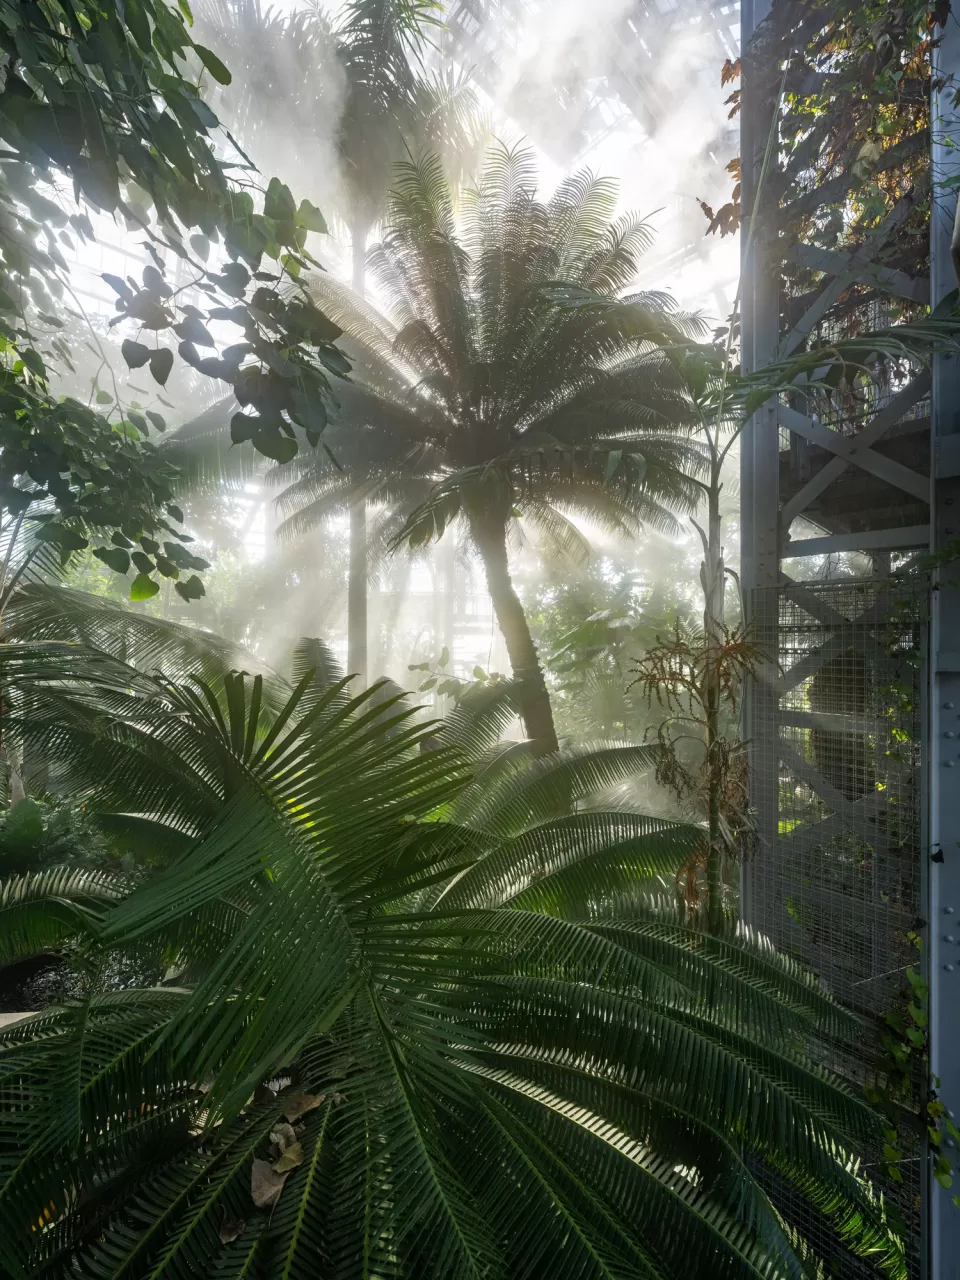 The plants of the USBG Tropics house benefit from increased humidity generated by a newly installed fogger system.